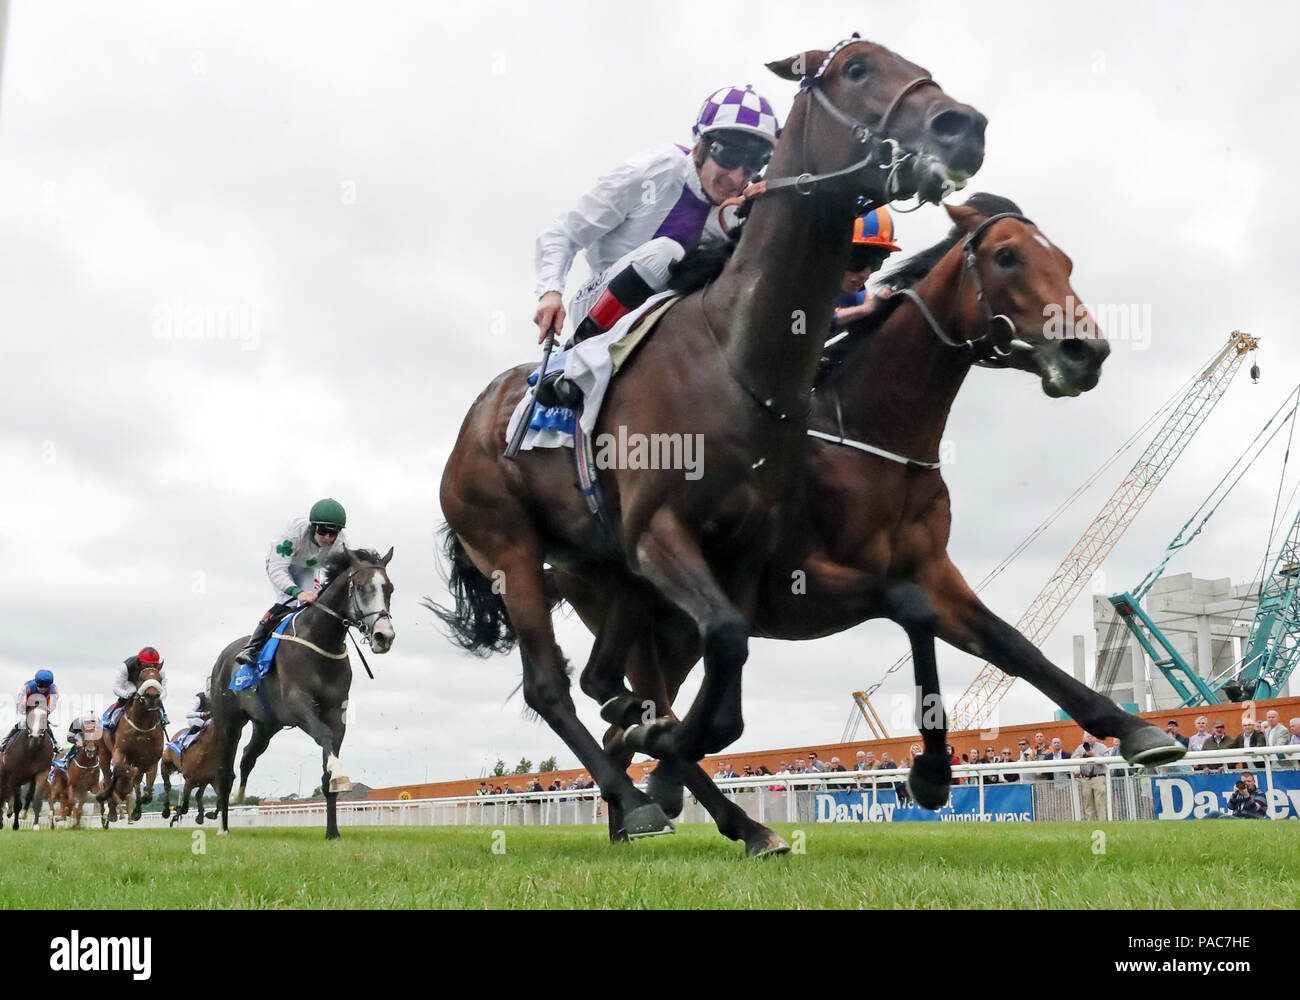 Guaranteed ridden by Kevin Mannong wins the The Club Godolphin Irish EBF Maiden during day one of the Darley Irish Oaks Weekend at Curragh Racecourse, County Kildare. Stock Photo